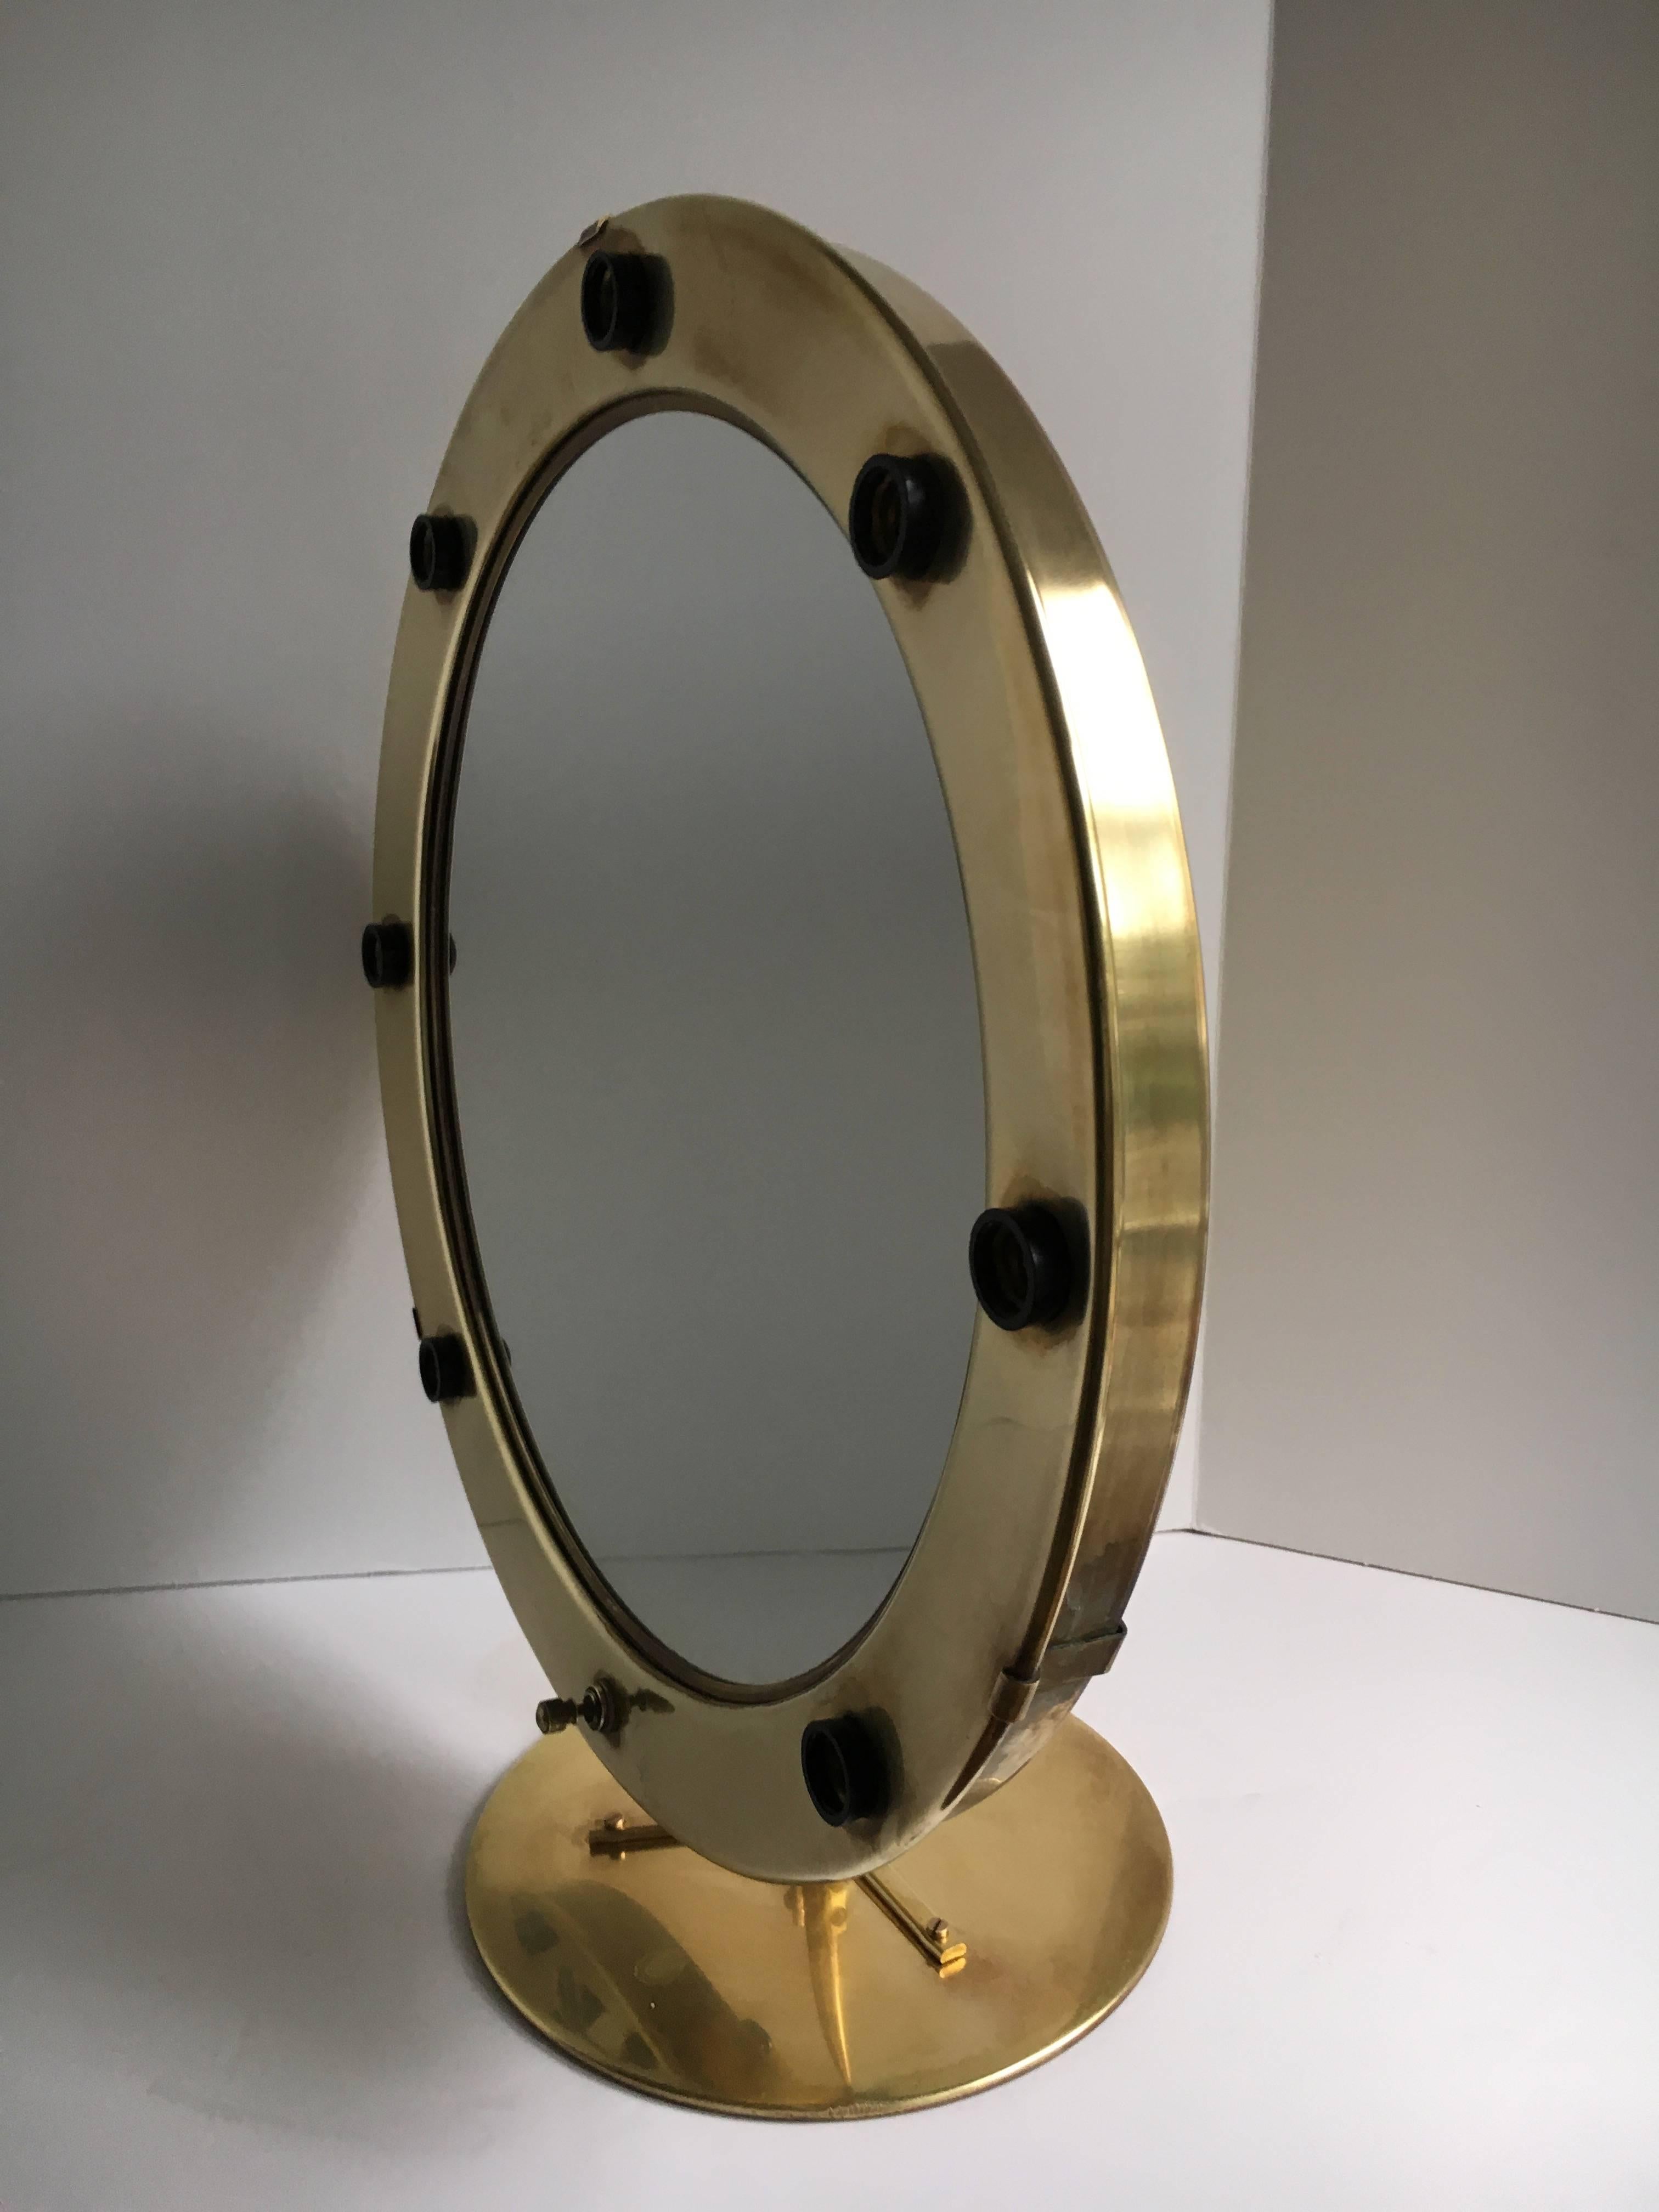 Round brass magnifying Hollywood makeup vanity mirror - a beautiful vanity mirror, this mirror only has magnifying. But the presentation is beautiful - for any woman that needs help seeing better or for actresses / models, this piece will allow you